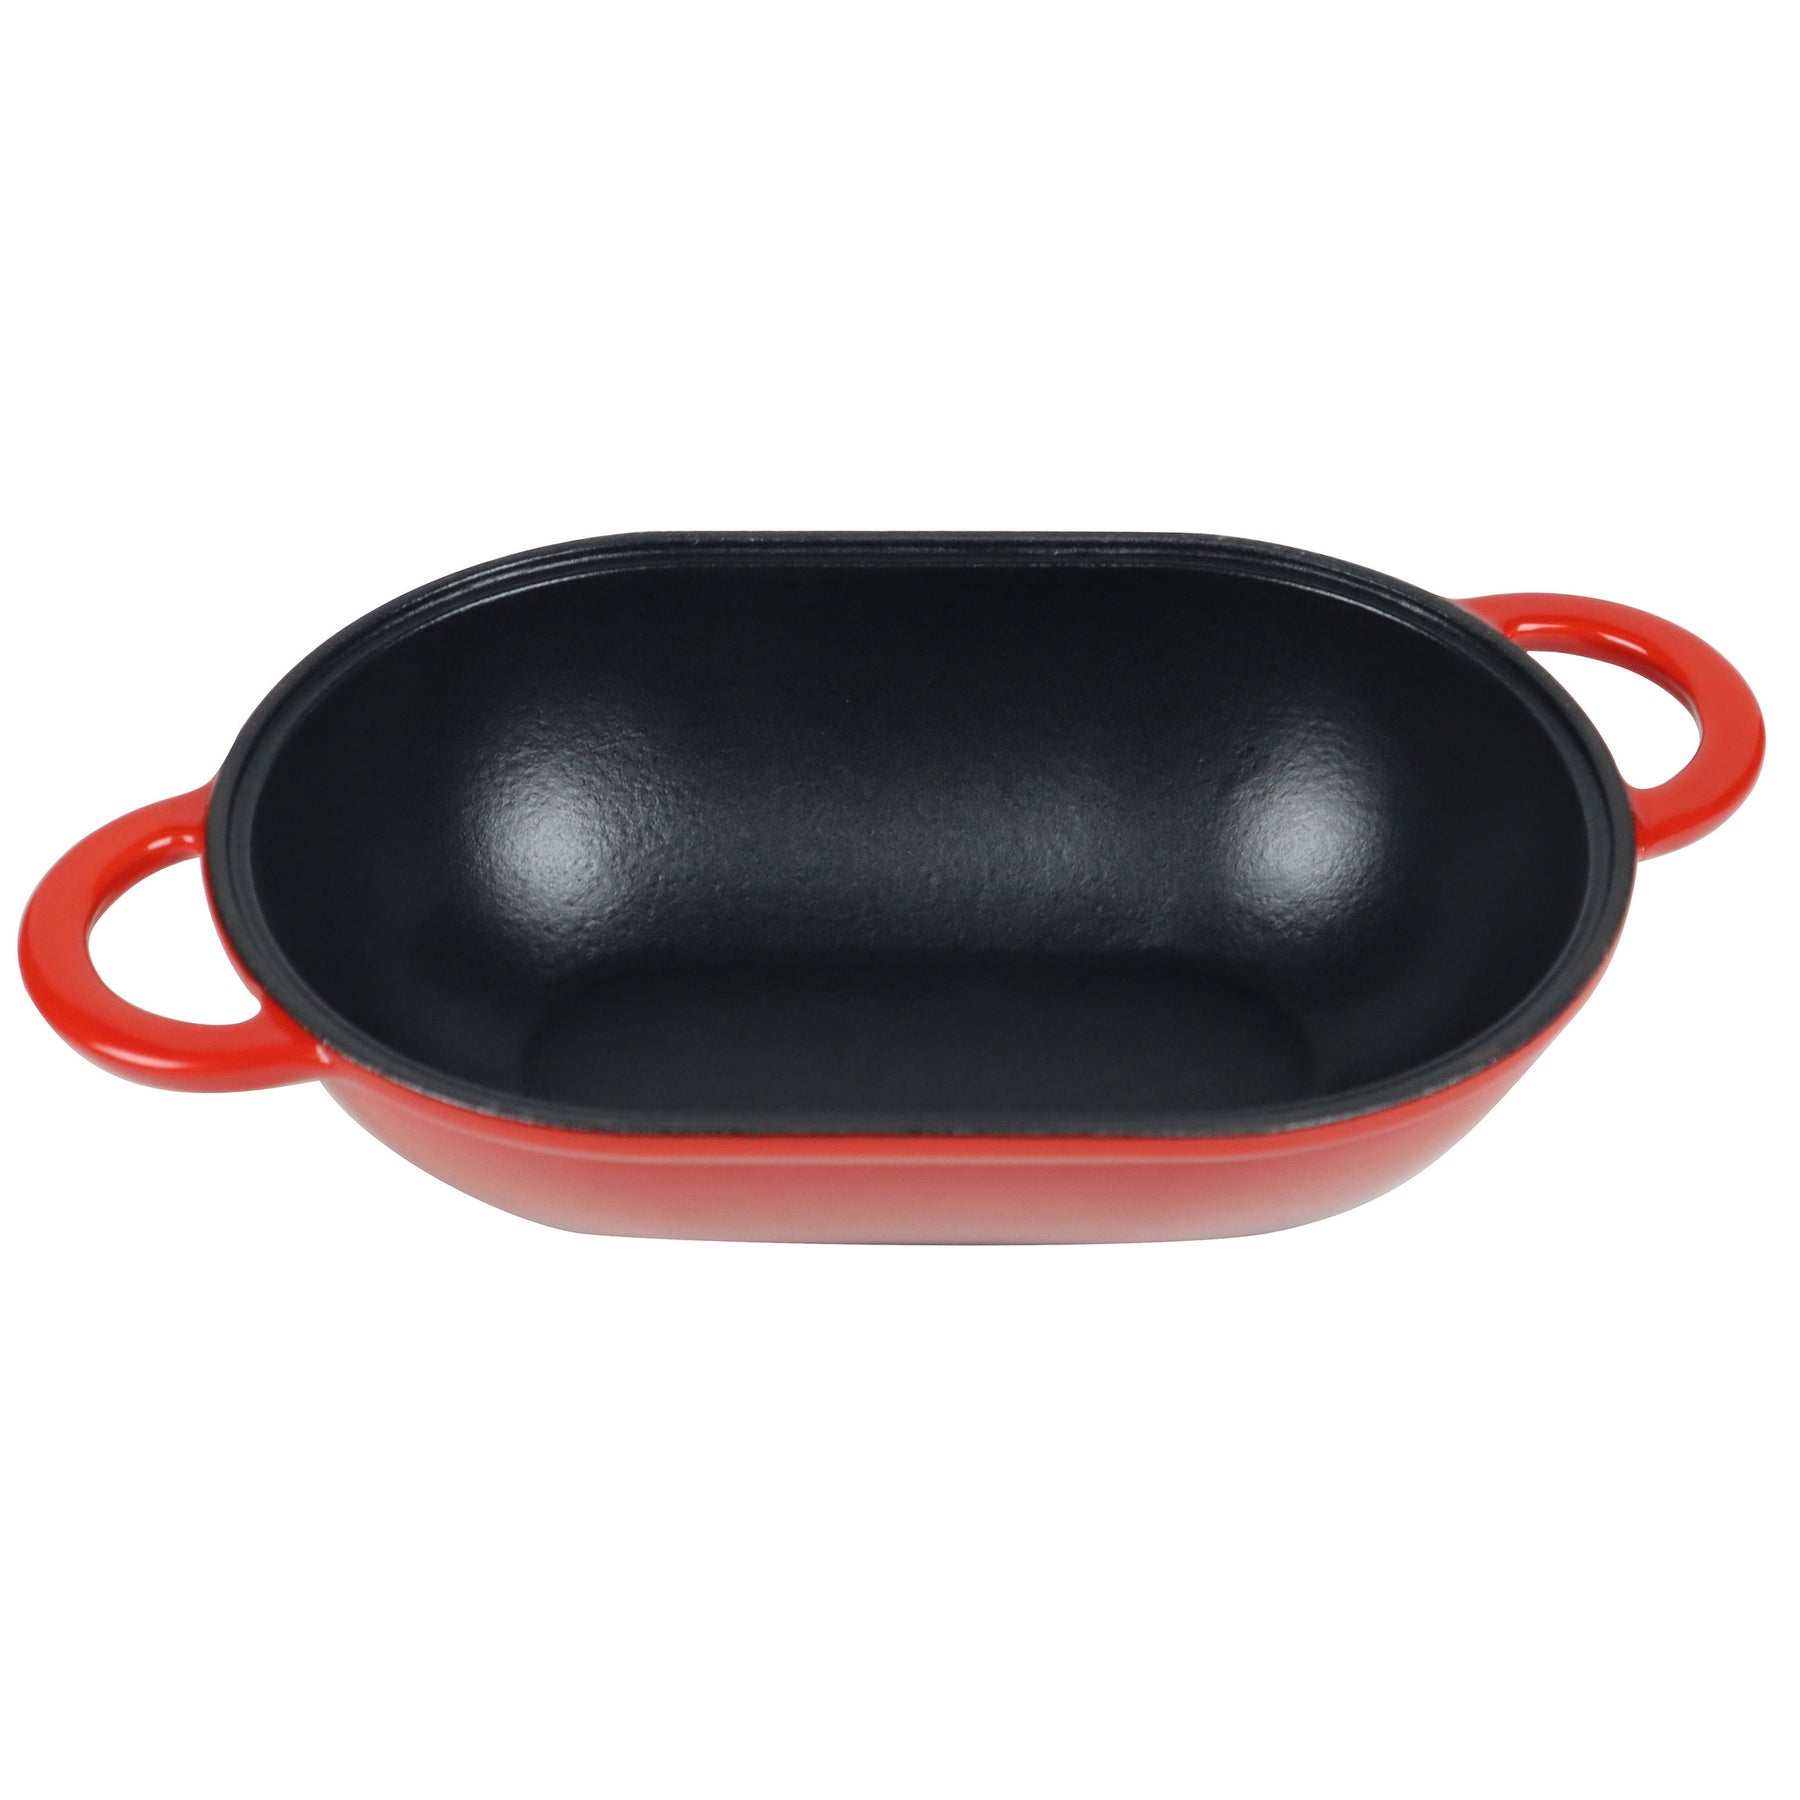 Cast Iron Bread Pan Dutch oven with Lid – Oven Safe Form for Baking,  Artisan Bread Kit - Loaf Pan